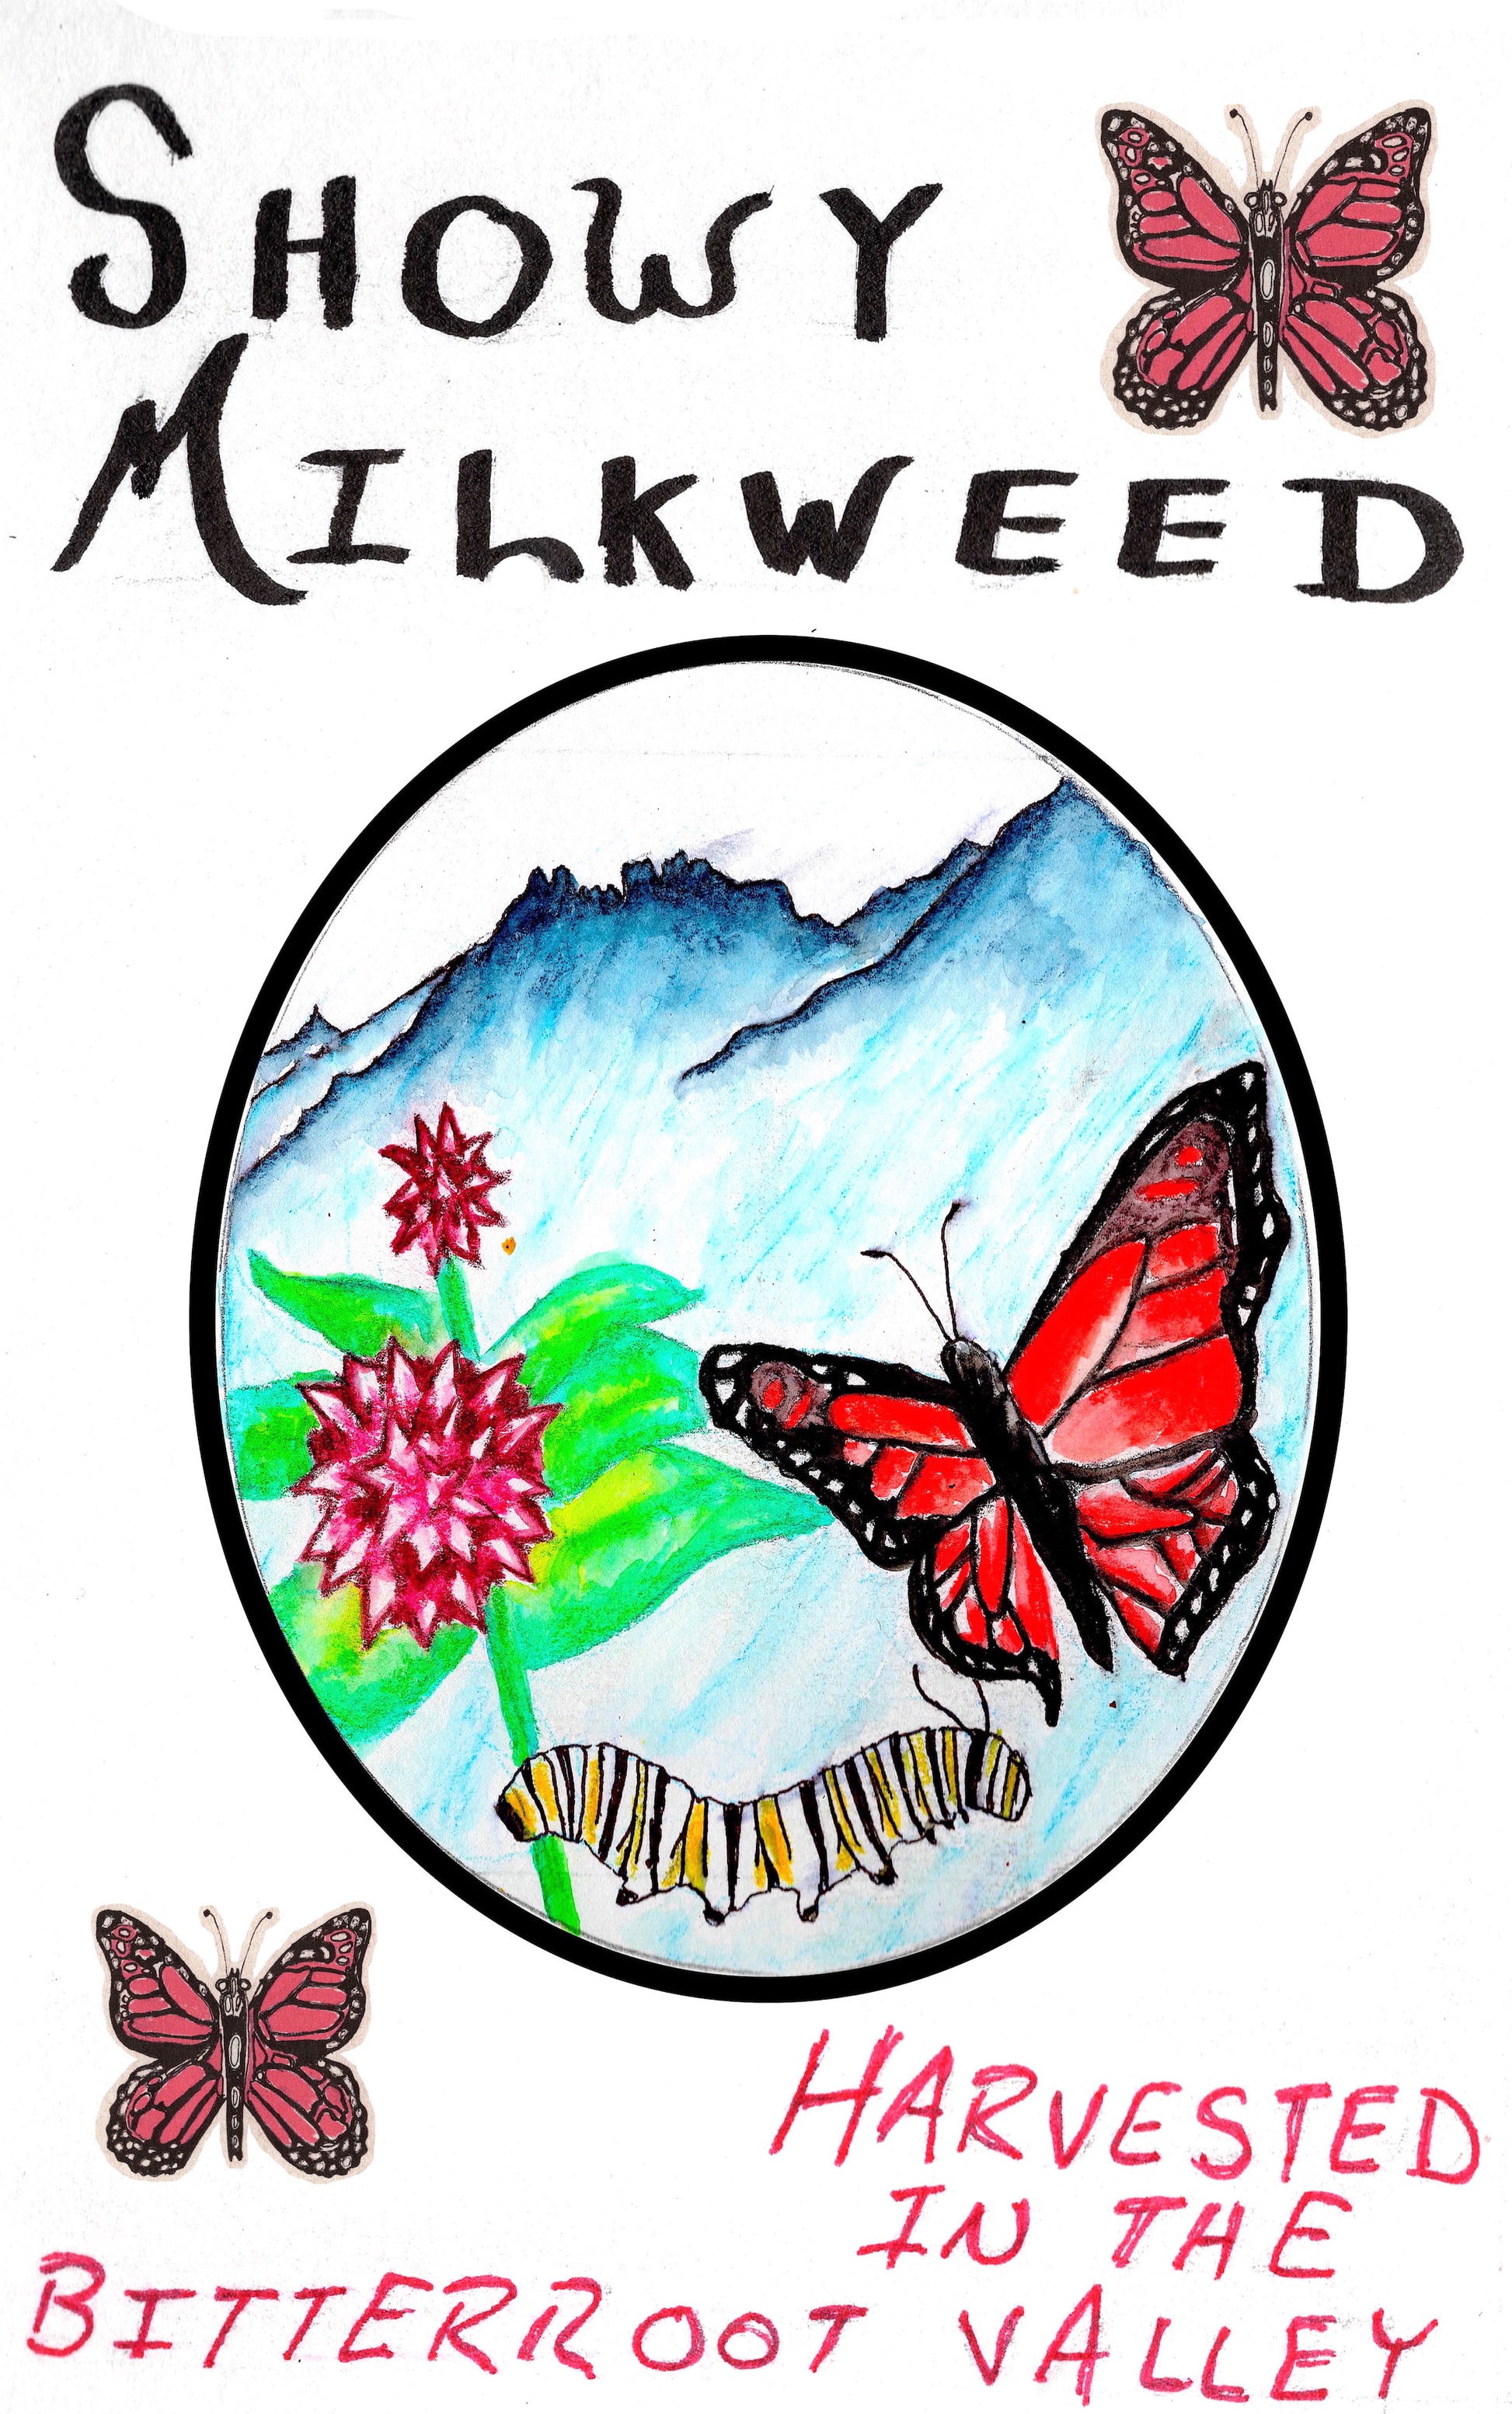 hand drawn seed packet art artwork showy milkweed seed high germination germ pollinators pollinator monarch butterflies butterfly bitterroot valley western montana packets printed solar power Asclepias speciosa